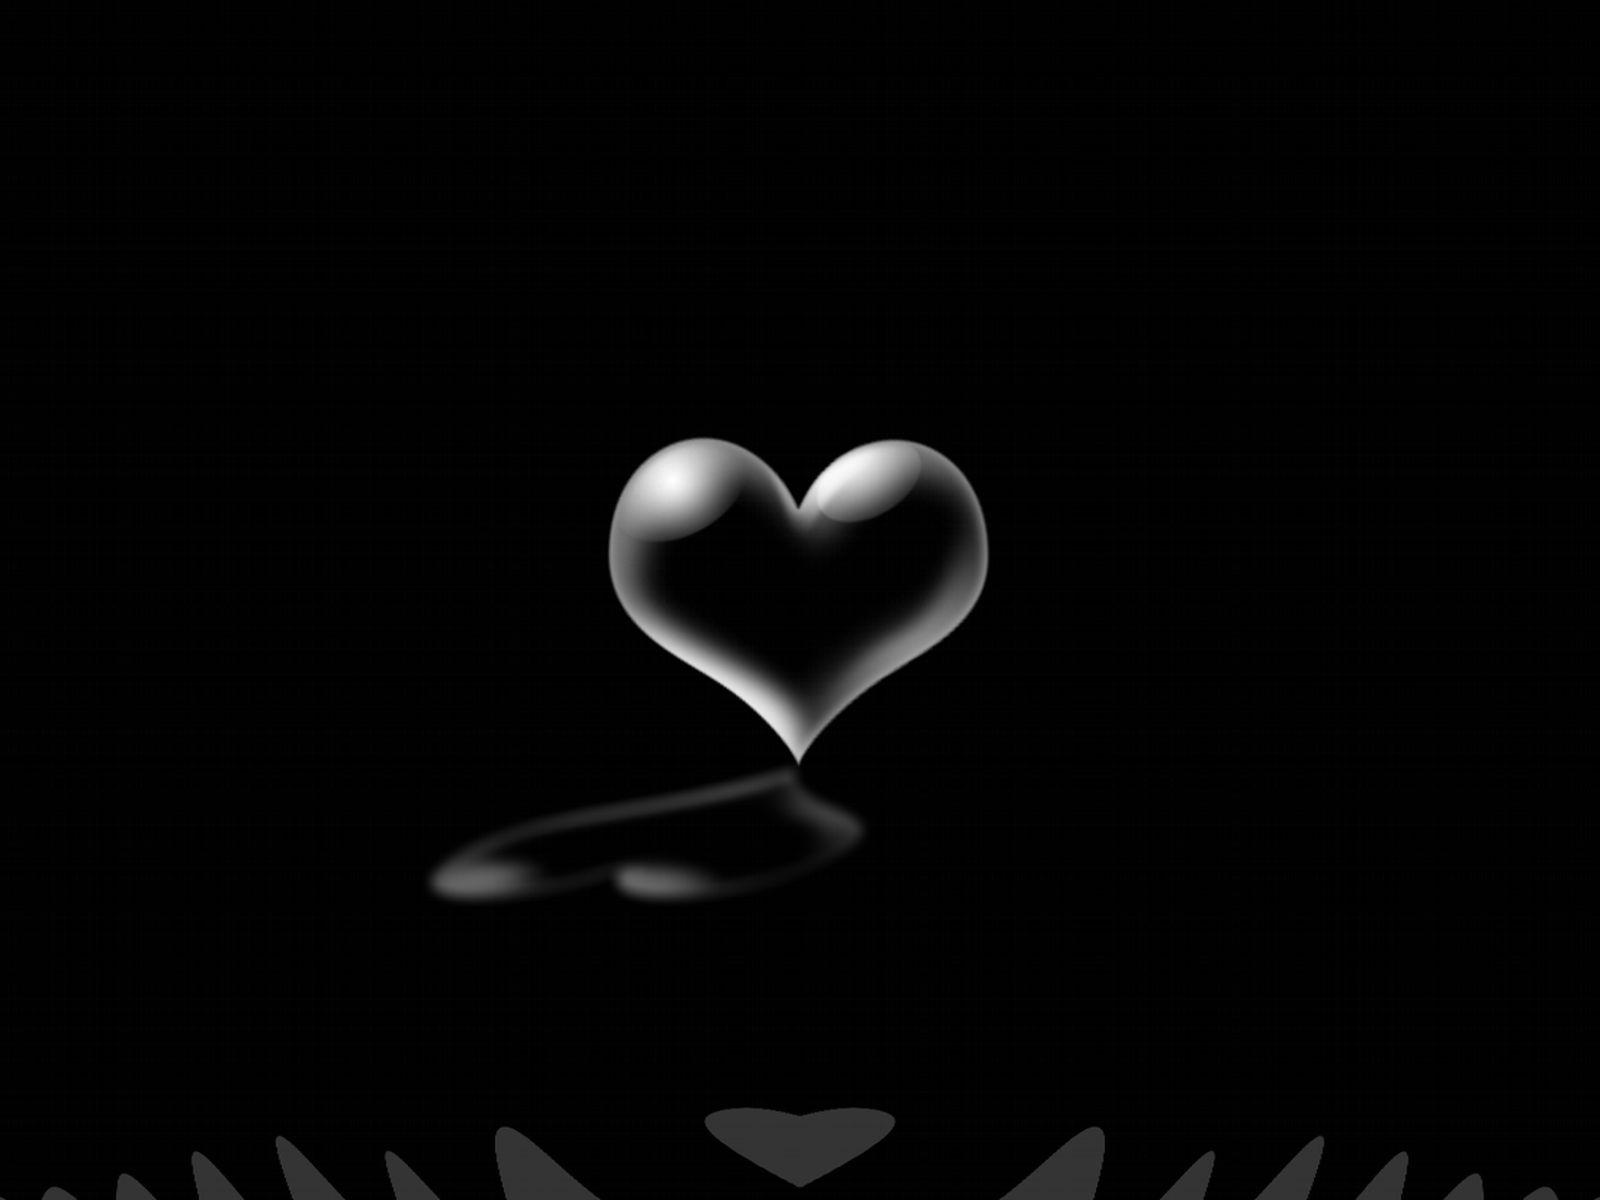 Luxury Love Wallpaper with Black Background. The Black Posters